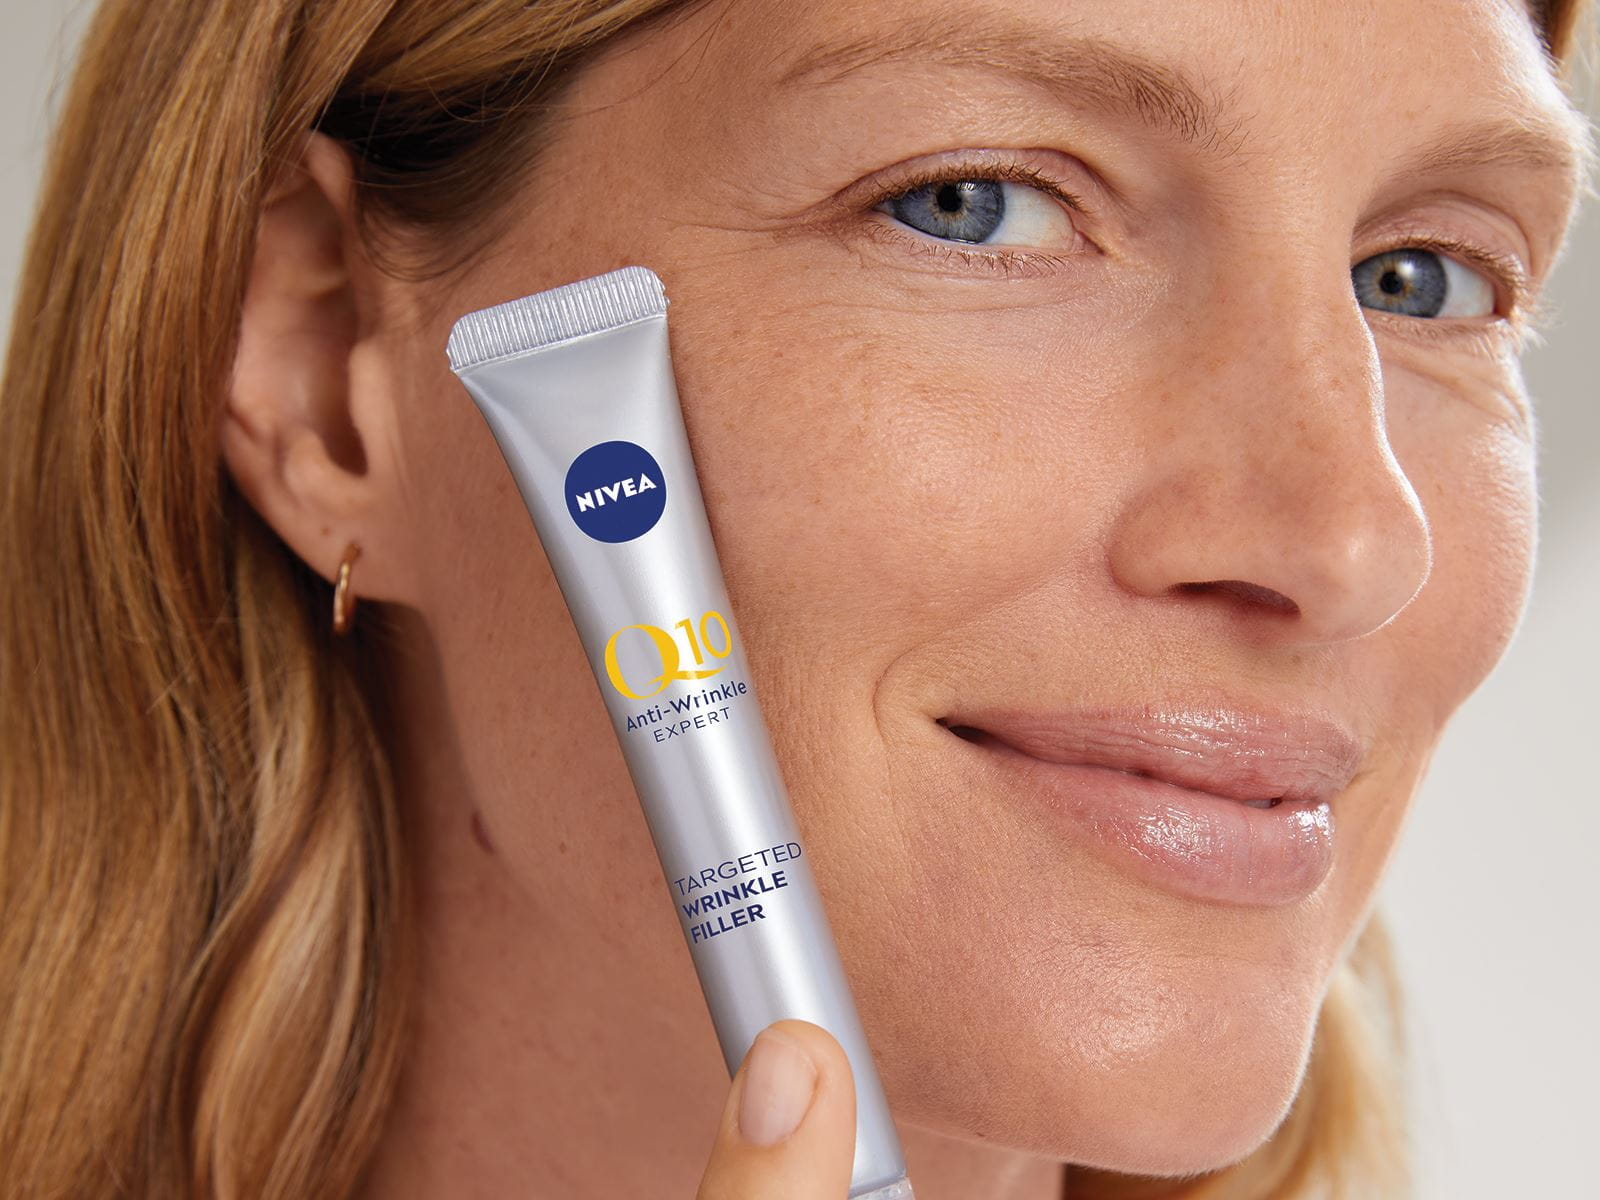 A woman confidently holding a Nivea Q10 product to the side of her face.